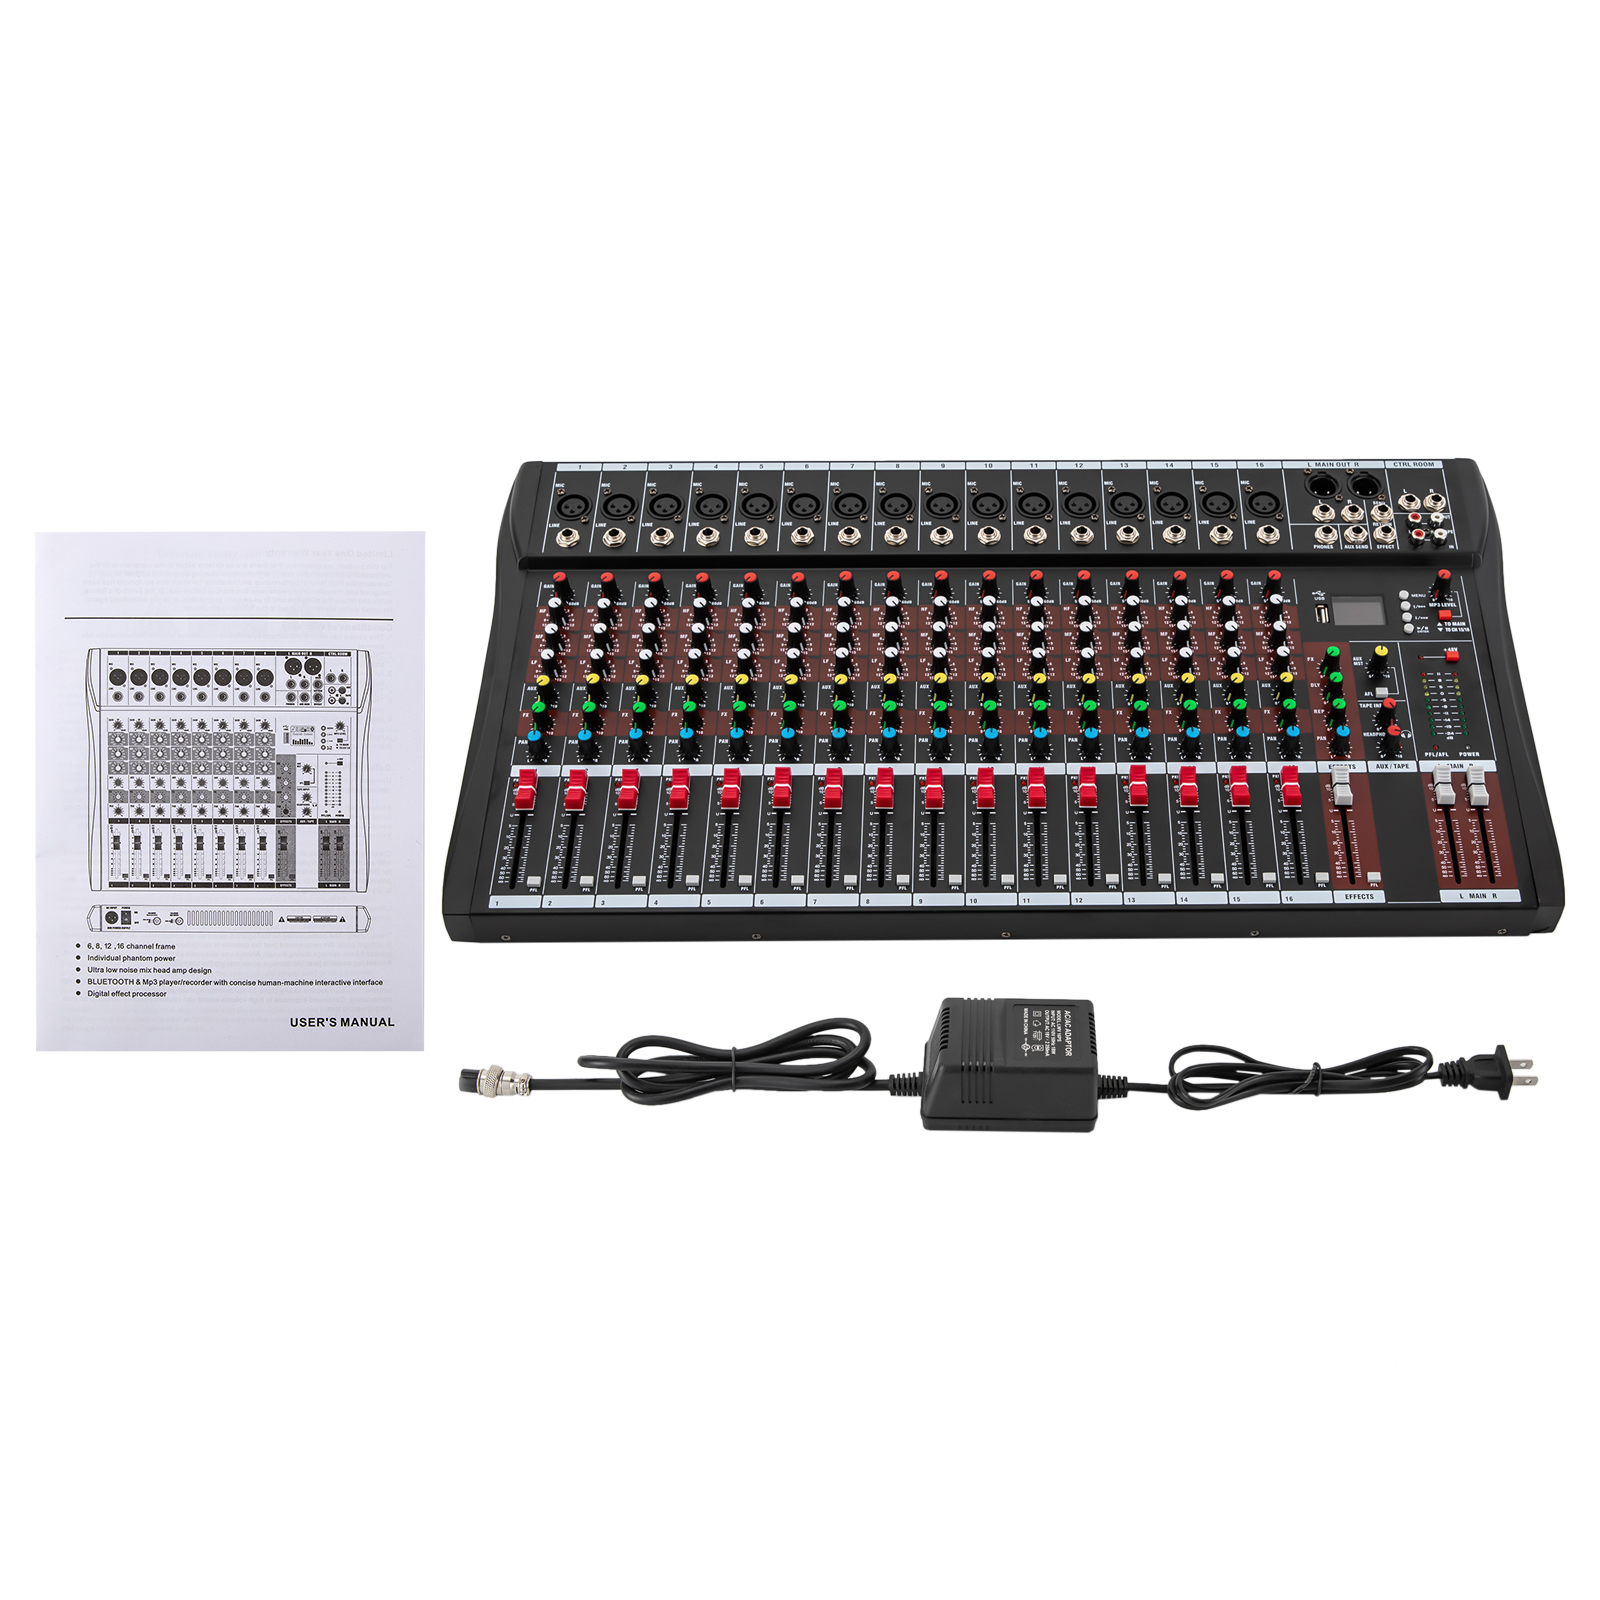 Miumaeov Bluetooth Studio Audio Mixer Sound Mixing Console Desk System Interface w/USB Drive for PC Recording Input AC 110V 50Hz 18W for Professional and Beginners Recording Function (16 Channel) - image 4 of 13